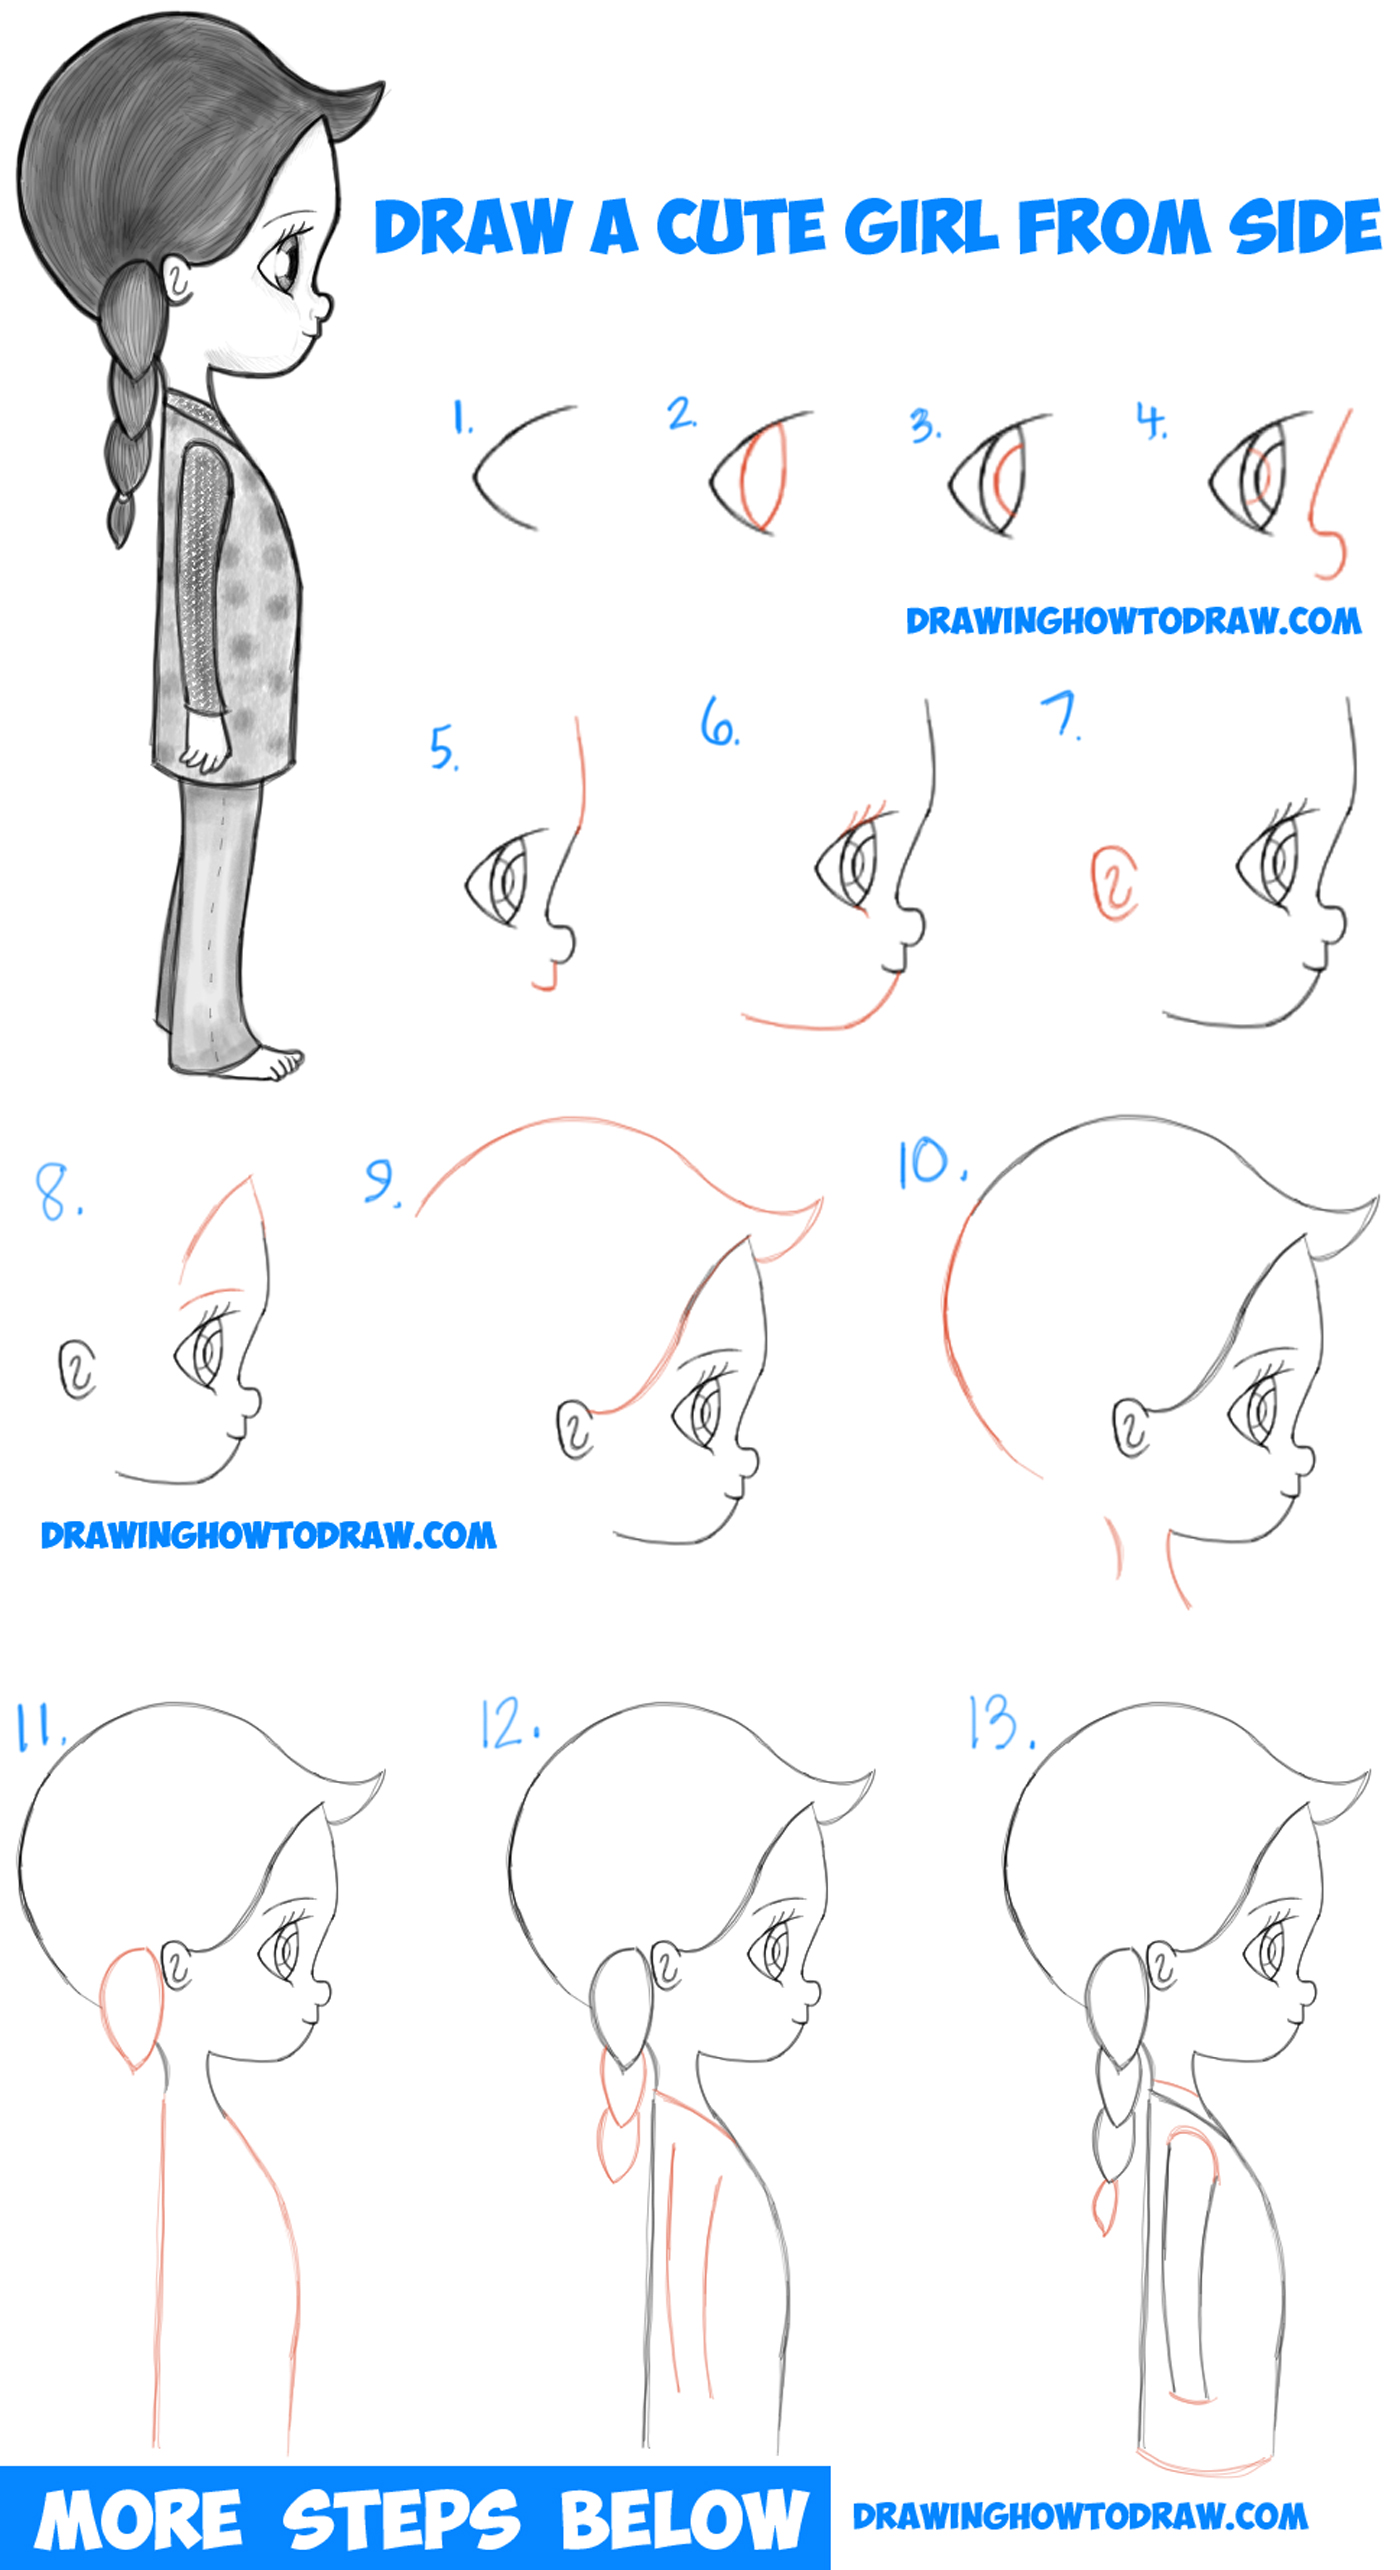 How to Draw a Cute Chibi Manga Anime Girl from the